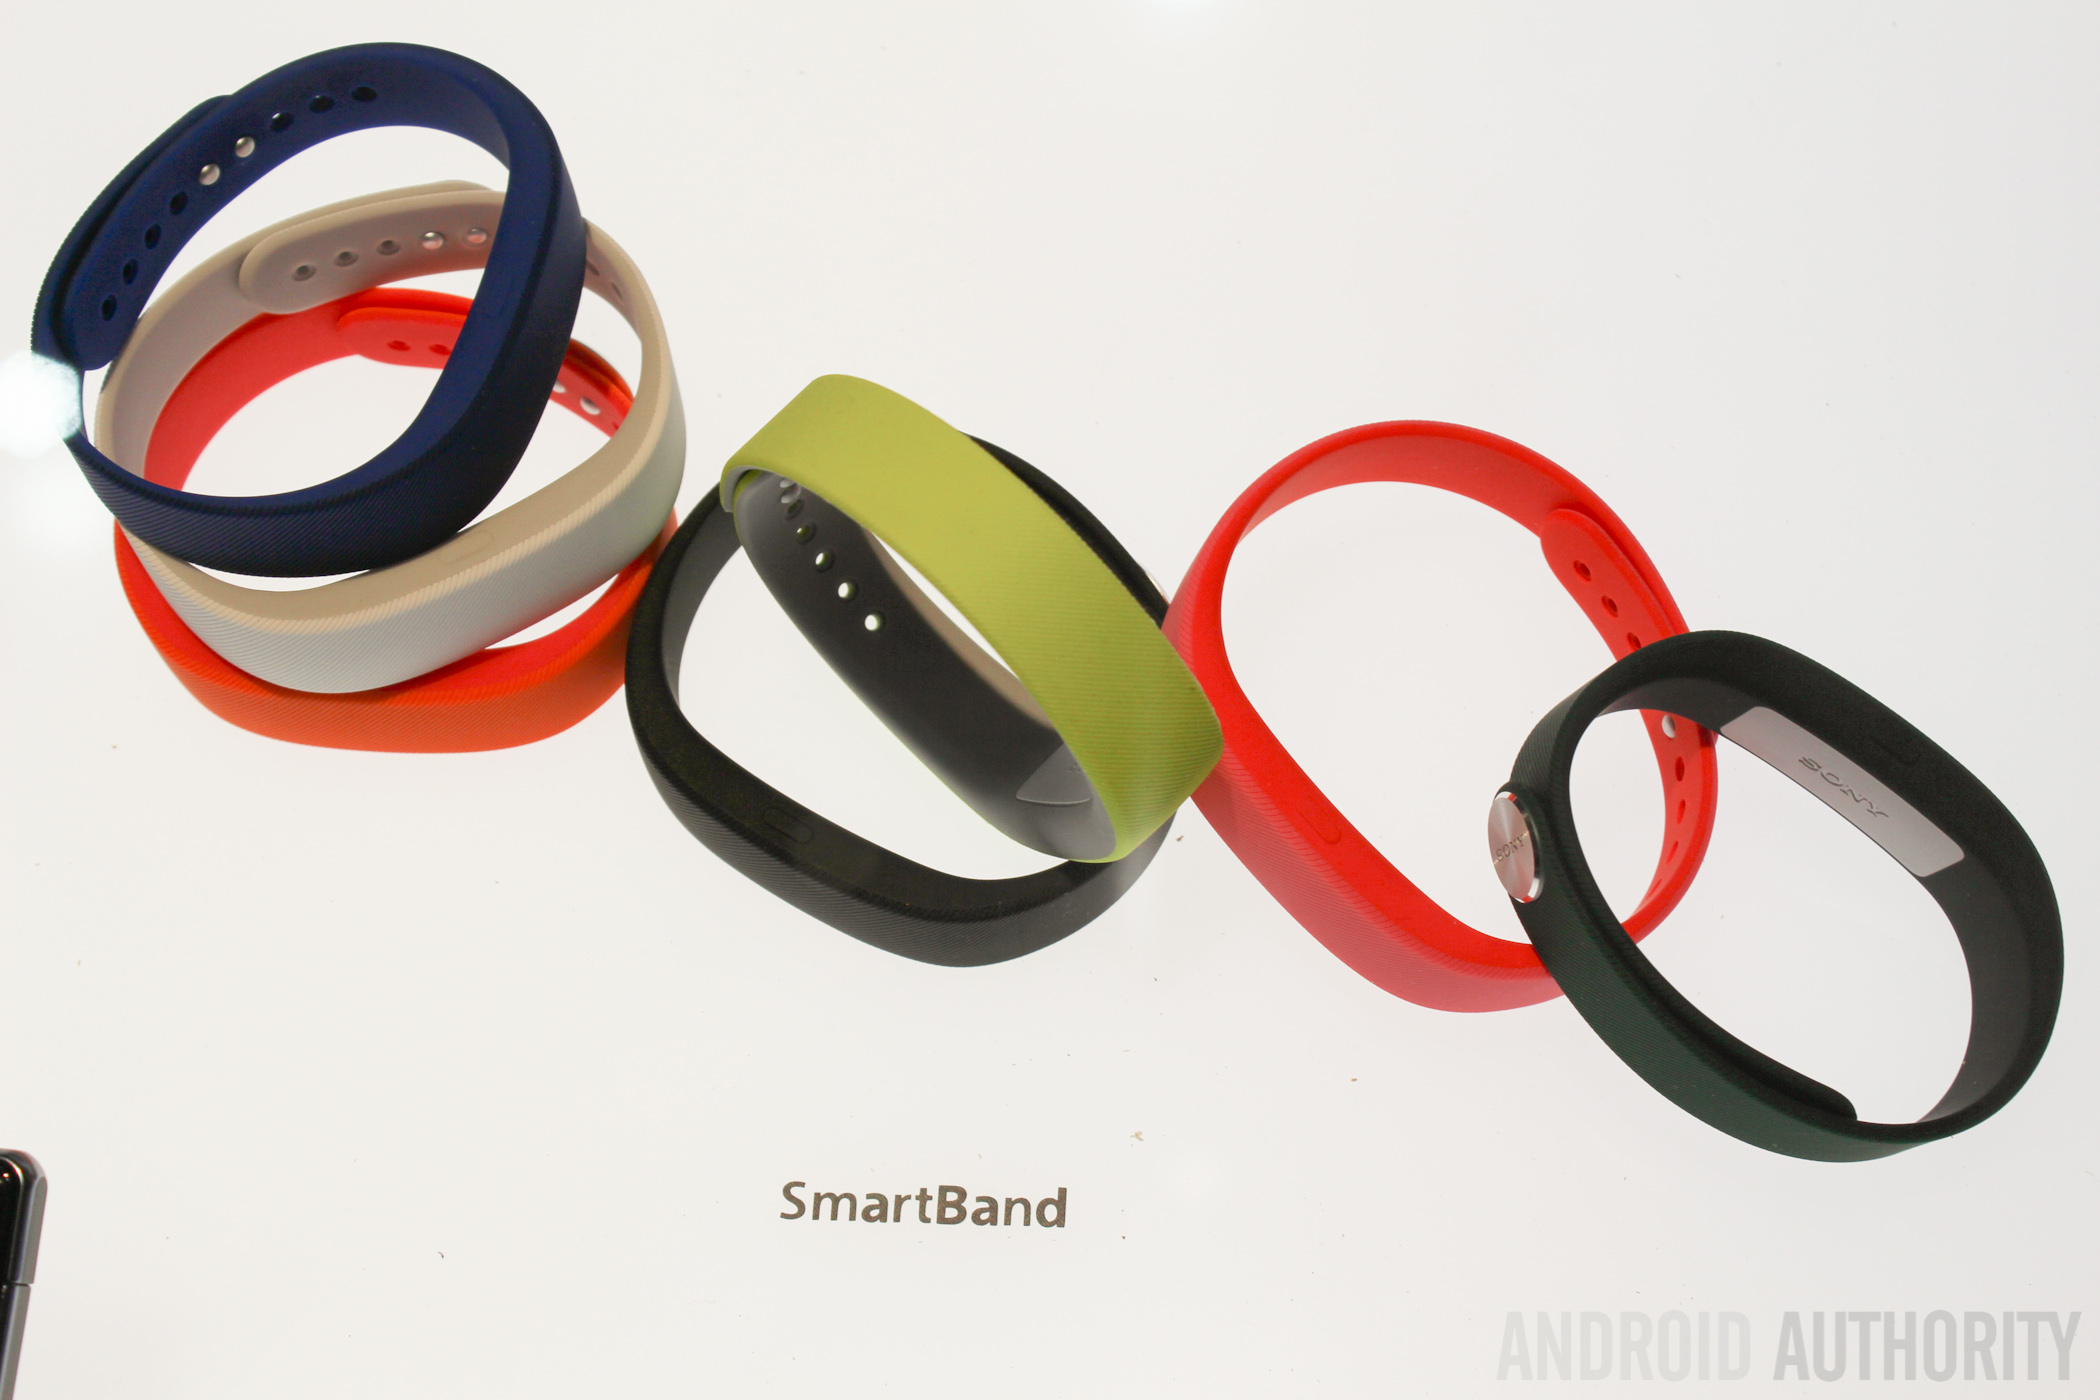 Sony Smartband Hands On Red White Yellow Black CES 2014-9